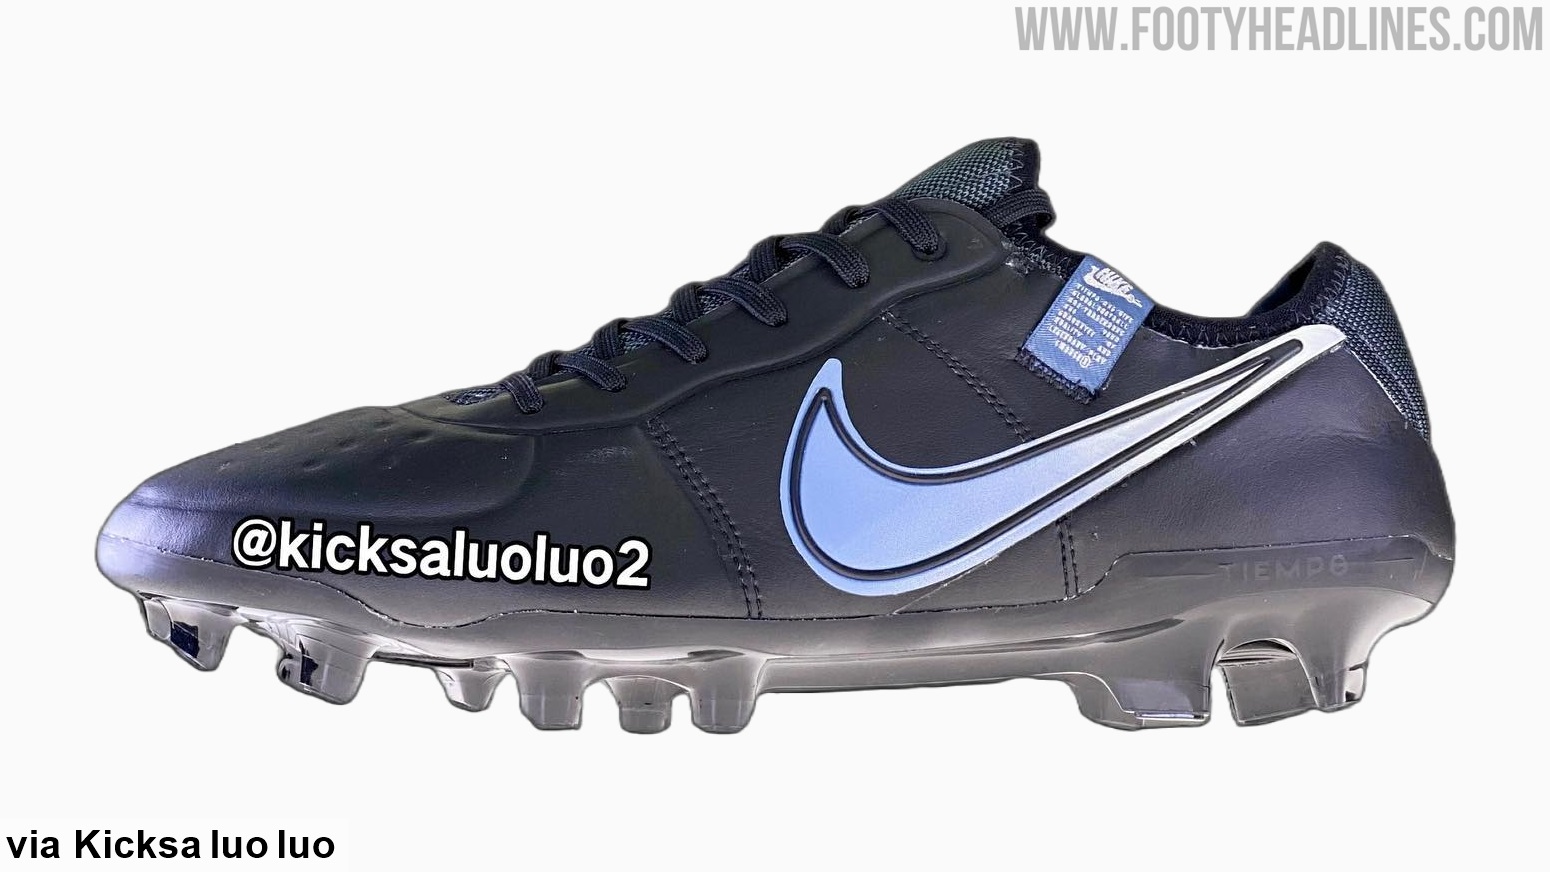 Shuraba mm brochure First-Ever Nike Air Force 1-Infused Football Boots Leaked - Footy Headlines